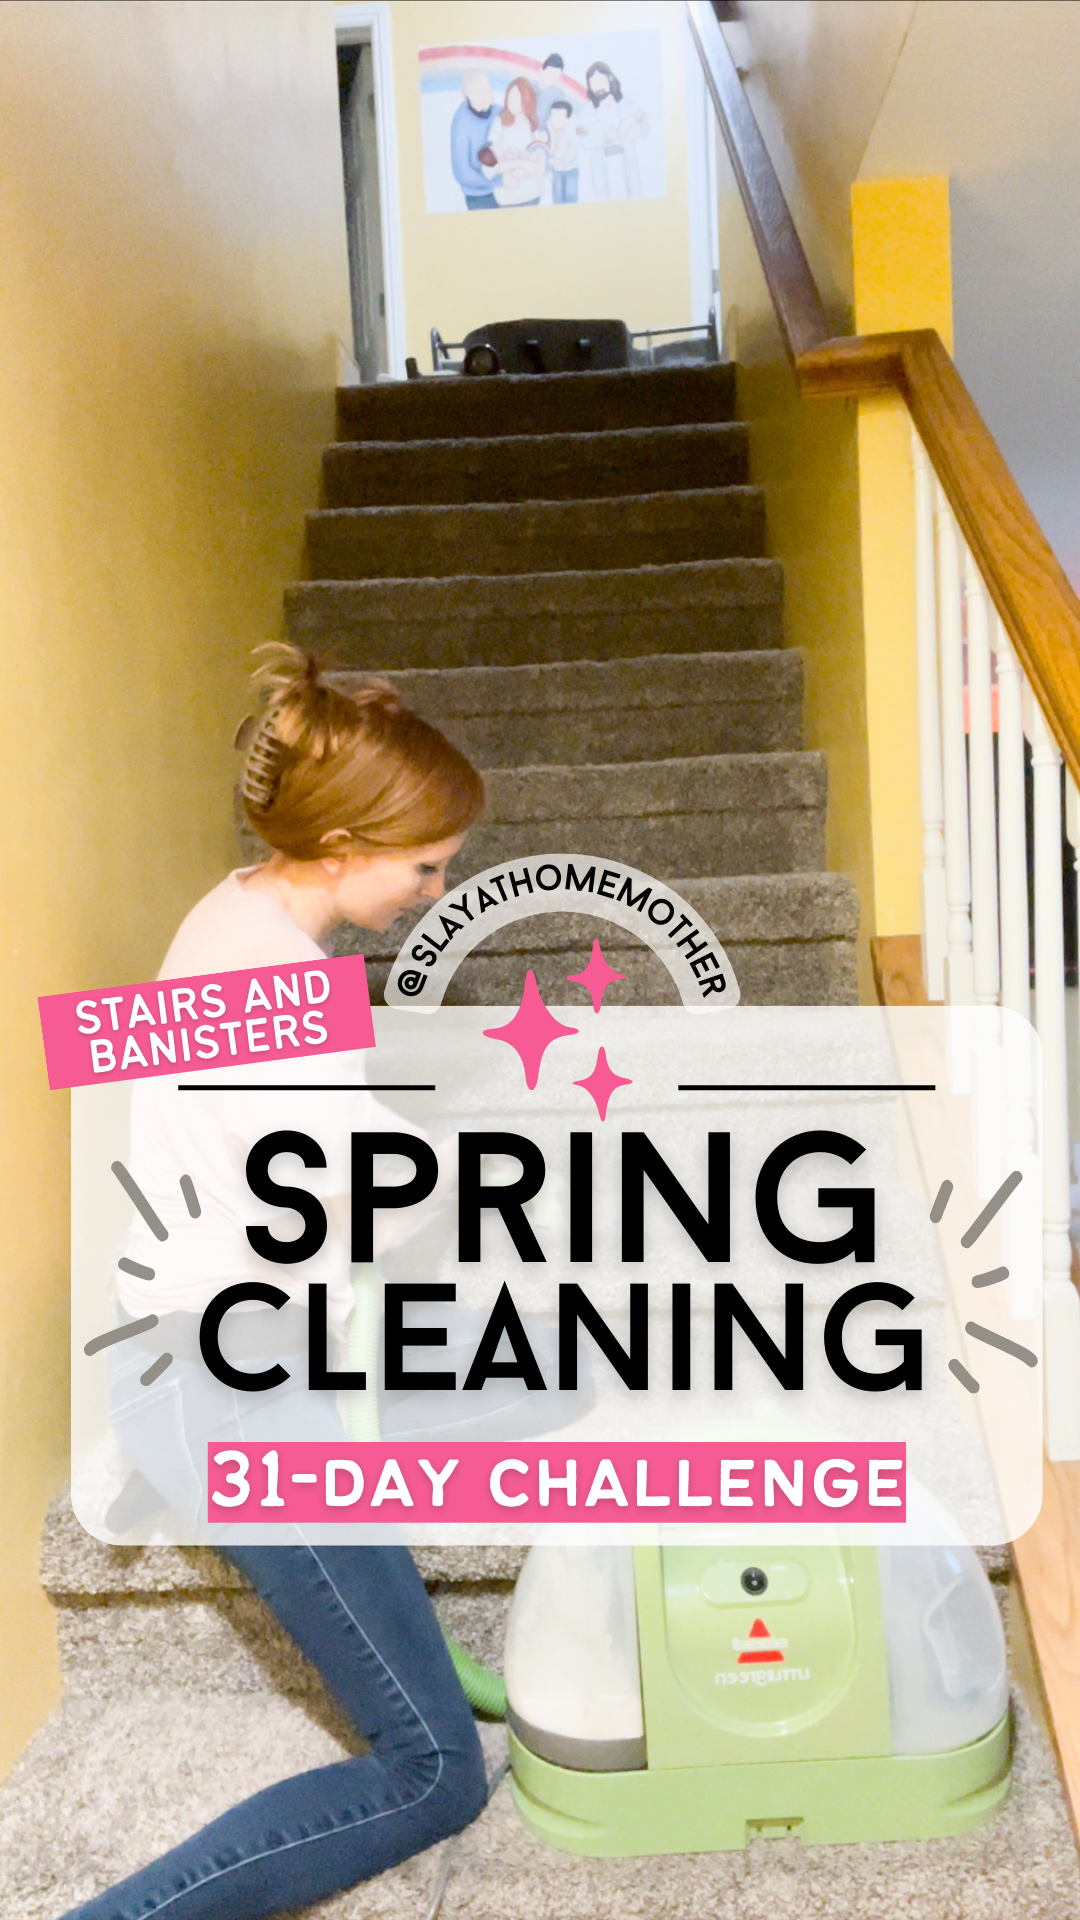 spring cleaning challenge - deep clean stair banisters and stairs